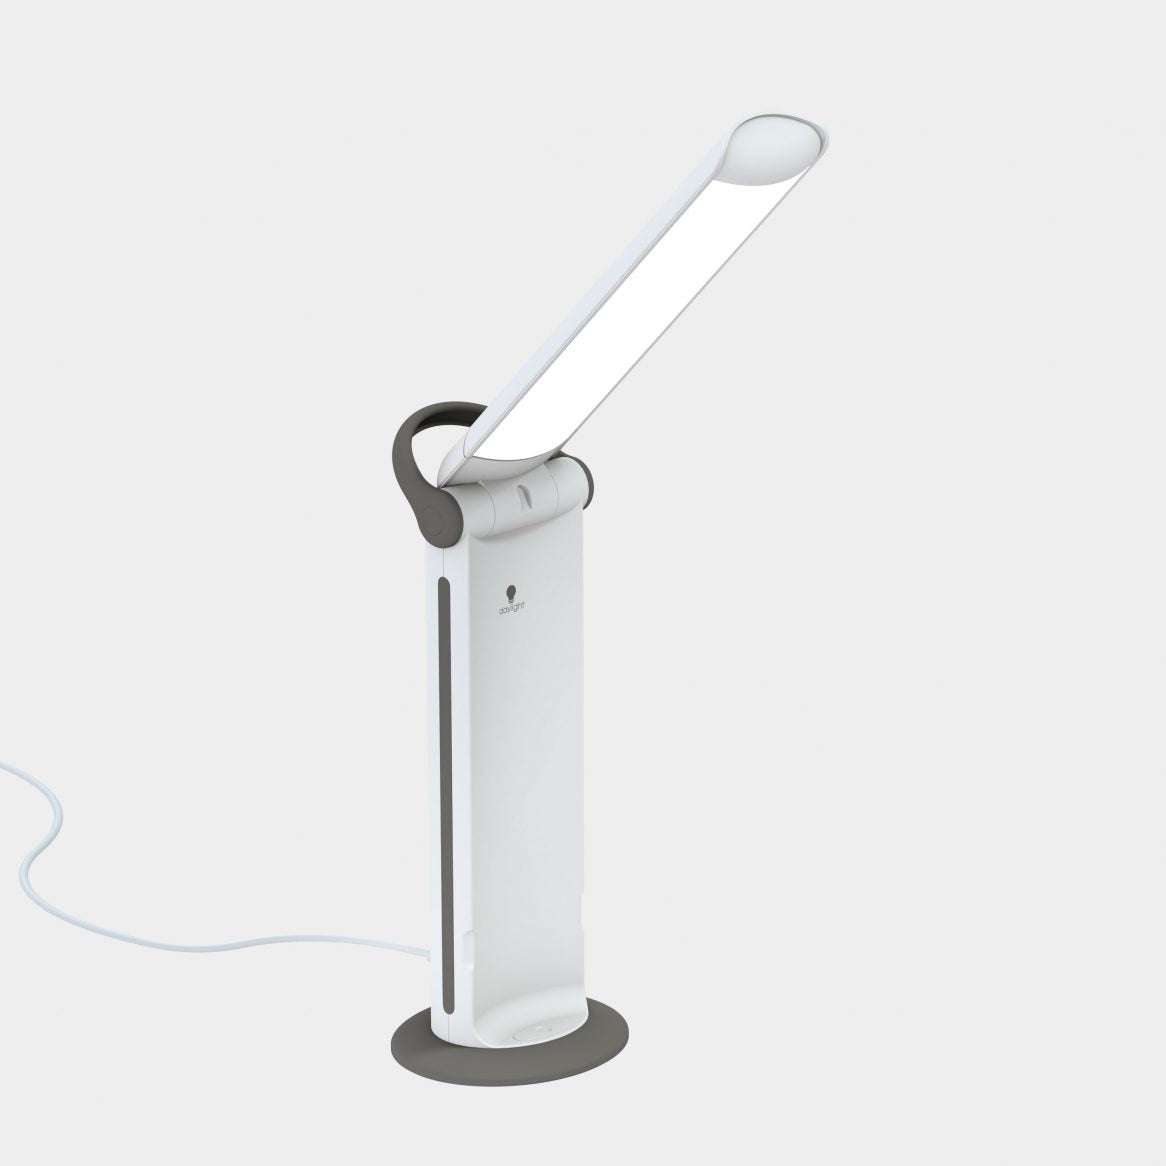 The Daylight Twist two lamp with power cord in standing with study base, handle and lighted arm in open position